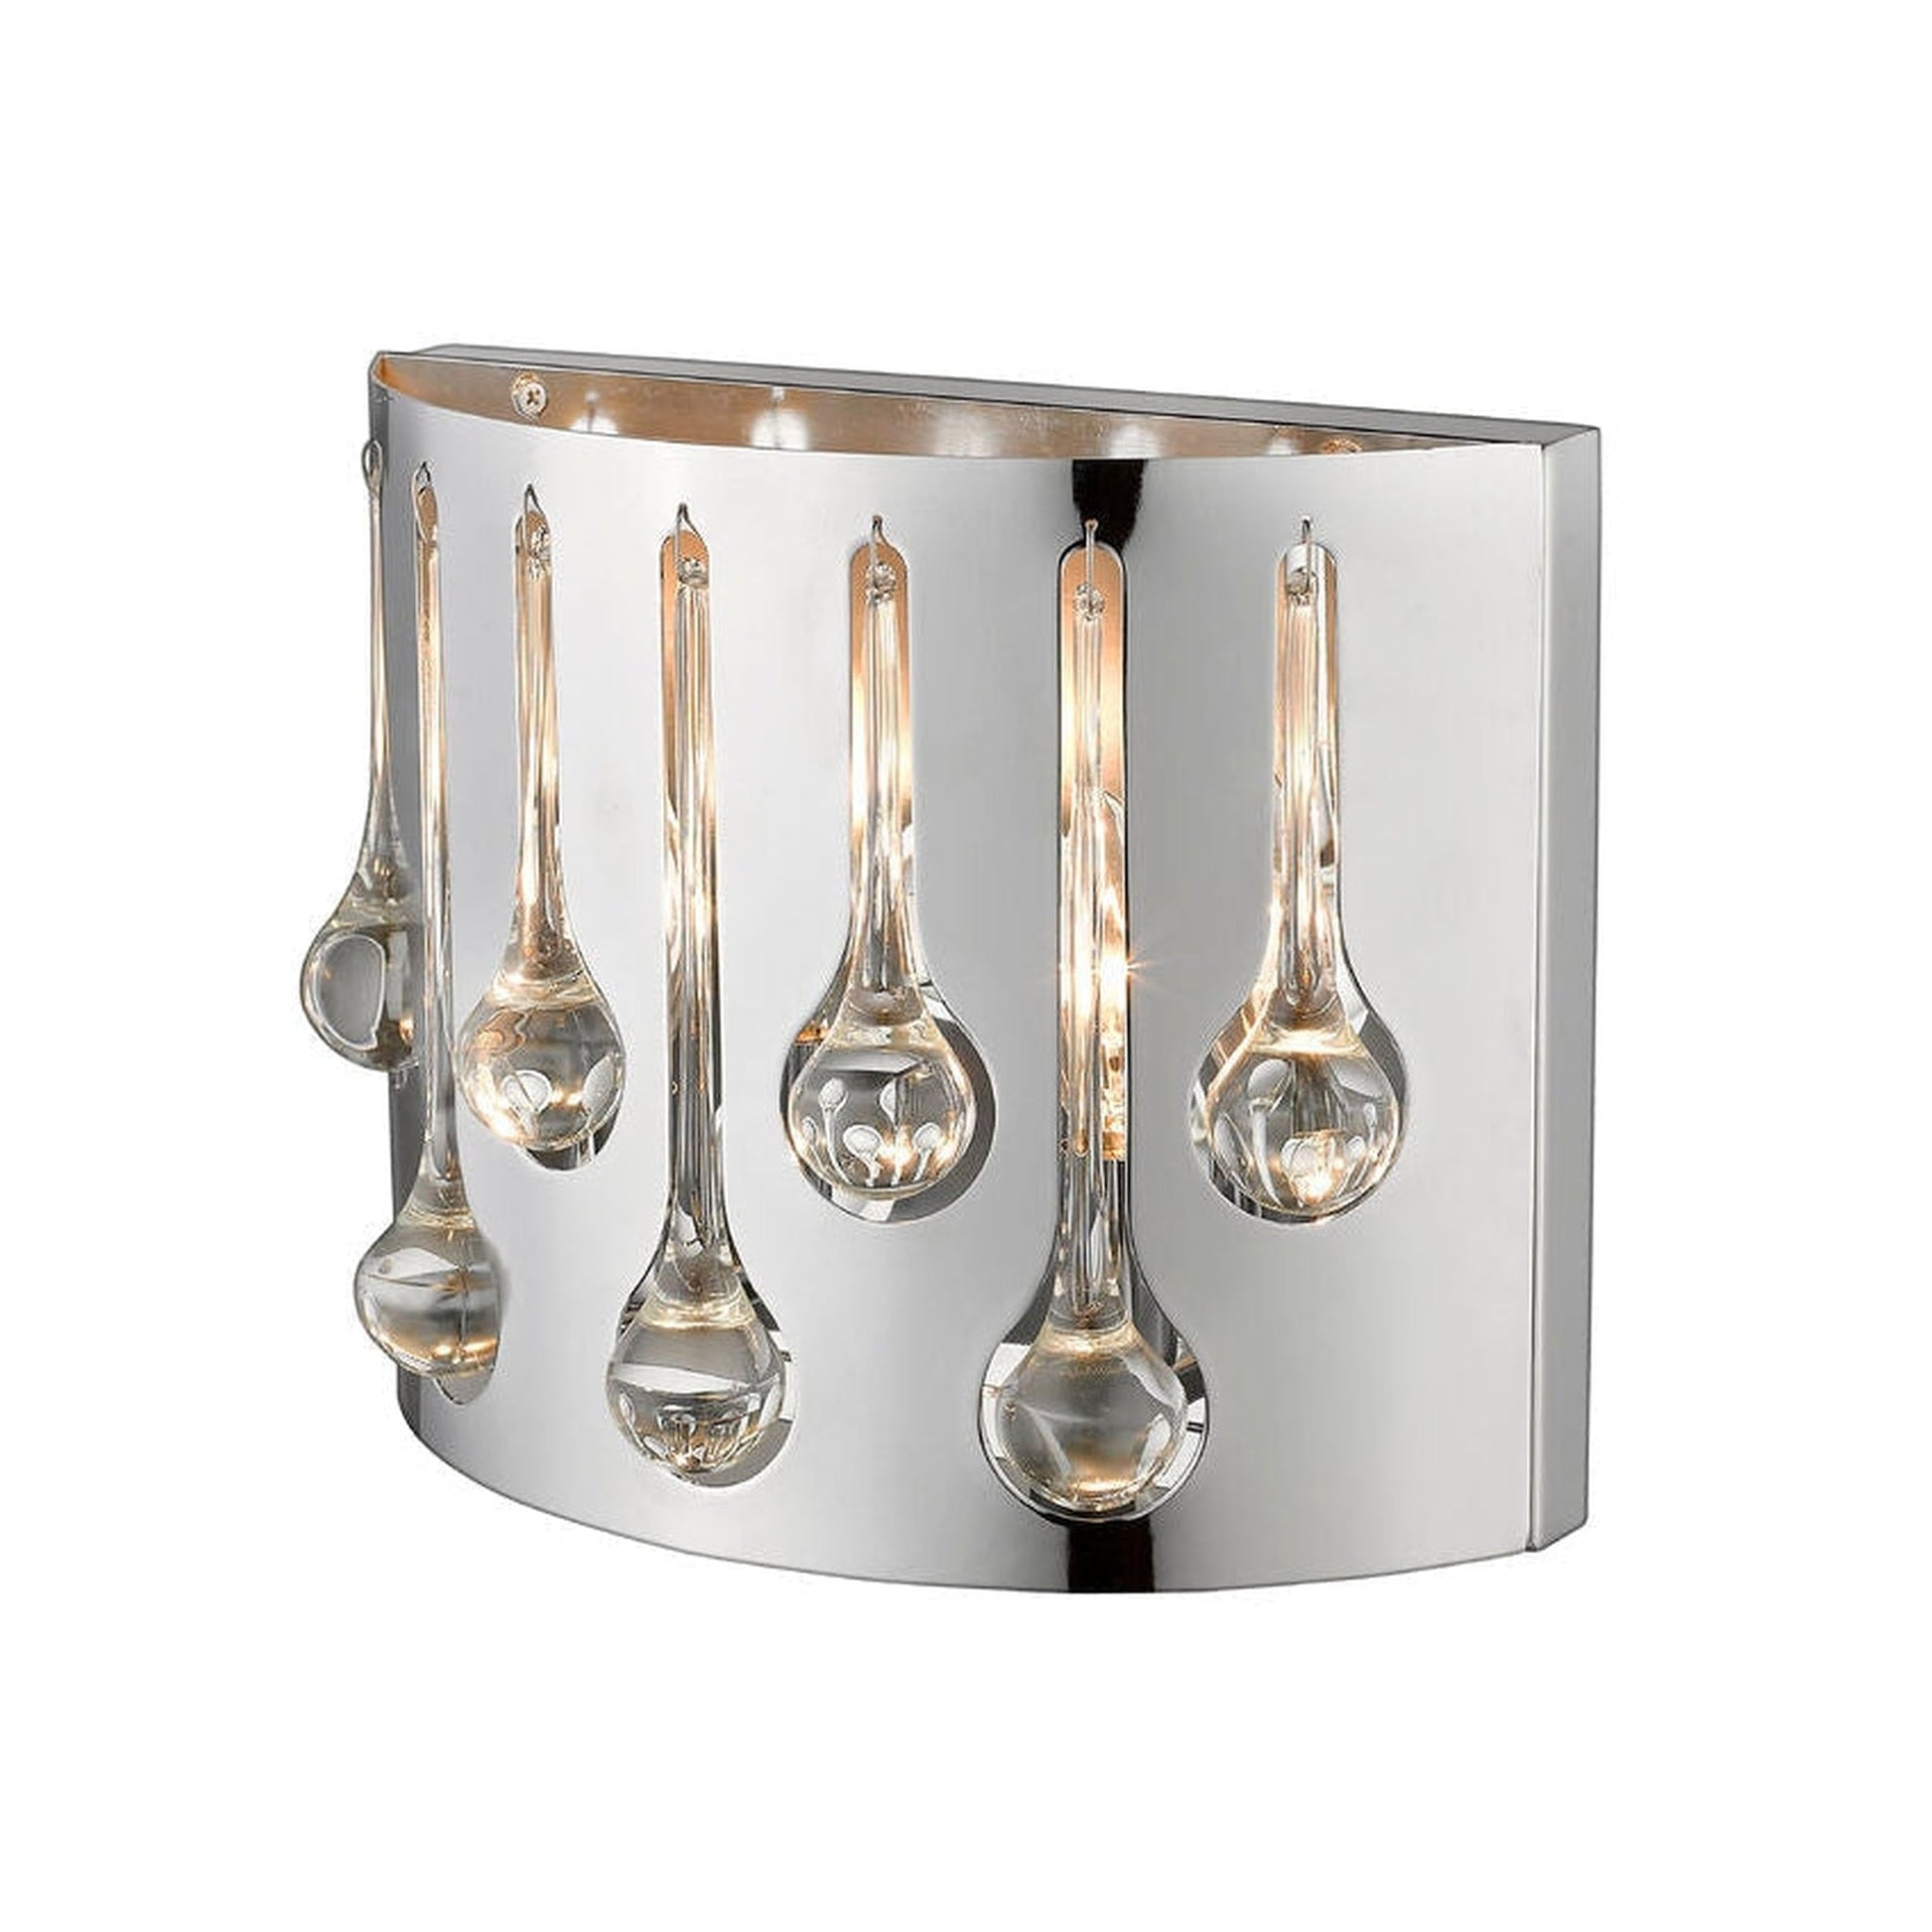 Z-Lite Oberon 12" 2-Light Chrome Wall Sconce With Steel and Crystal Shade